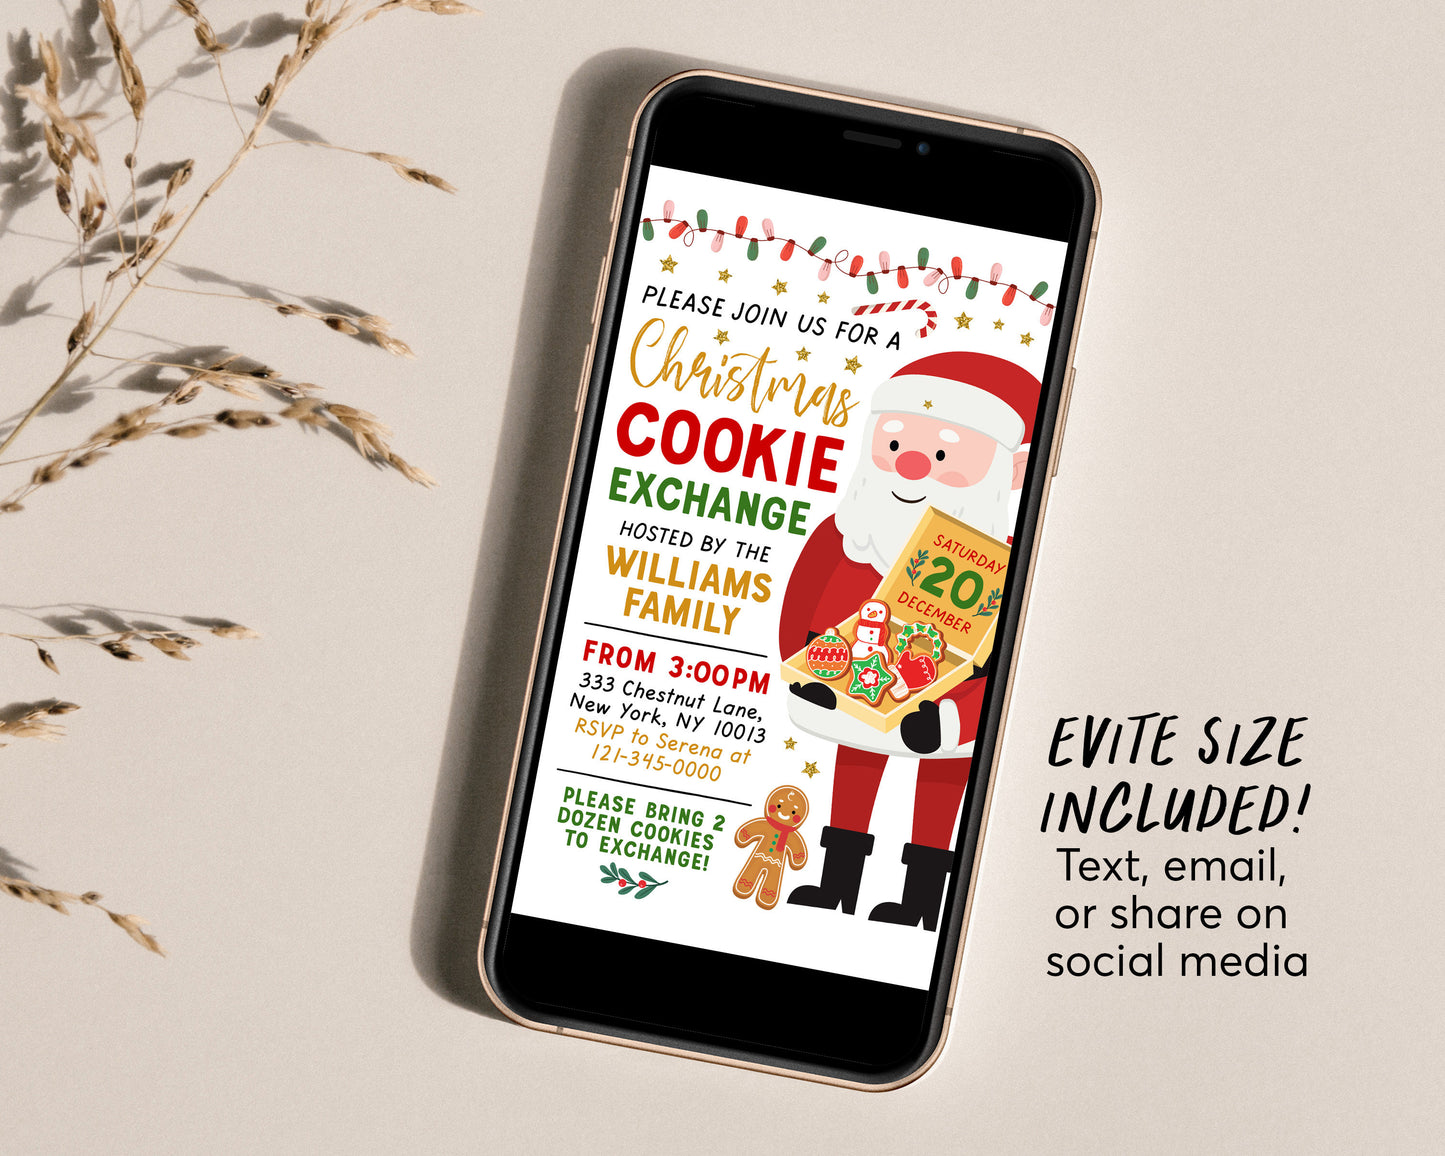 Christmas Cookie Exchange Invitation Editable Template, Xmas Cookie Swap Party Invite, Baking Party Holiday Exchange Cookie Decorating